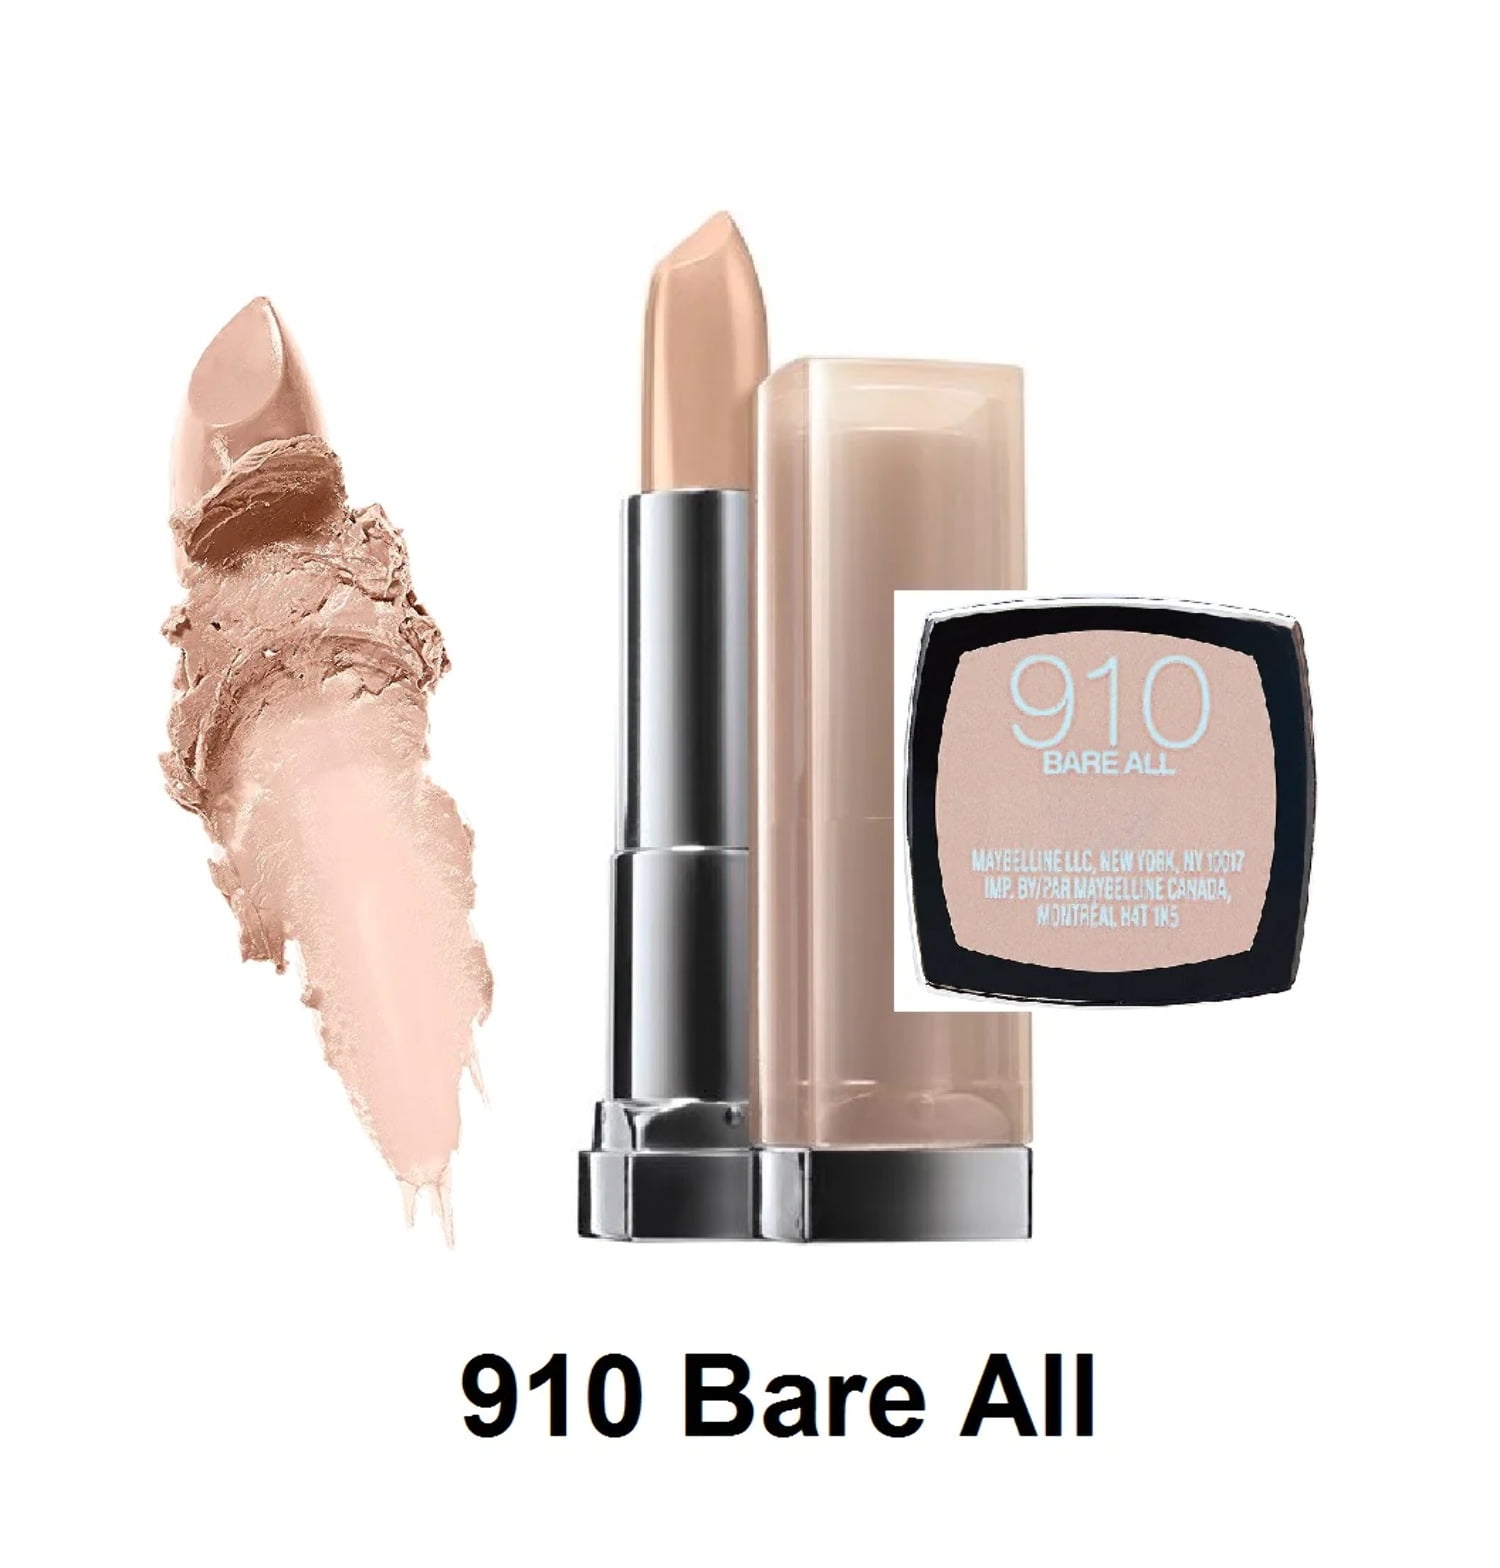 Maybelline Colorshow Khol 420 Barely Beige 1pc